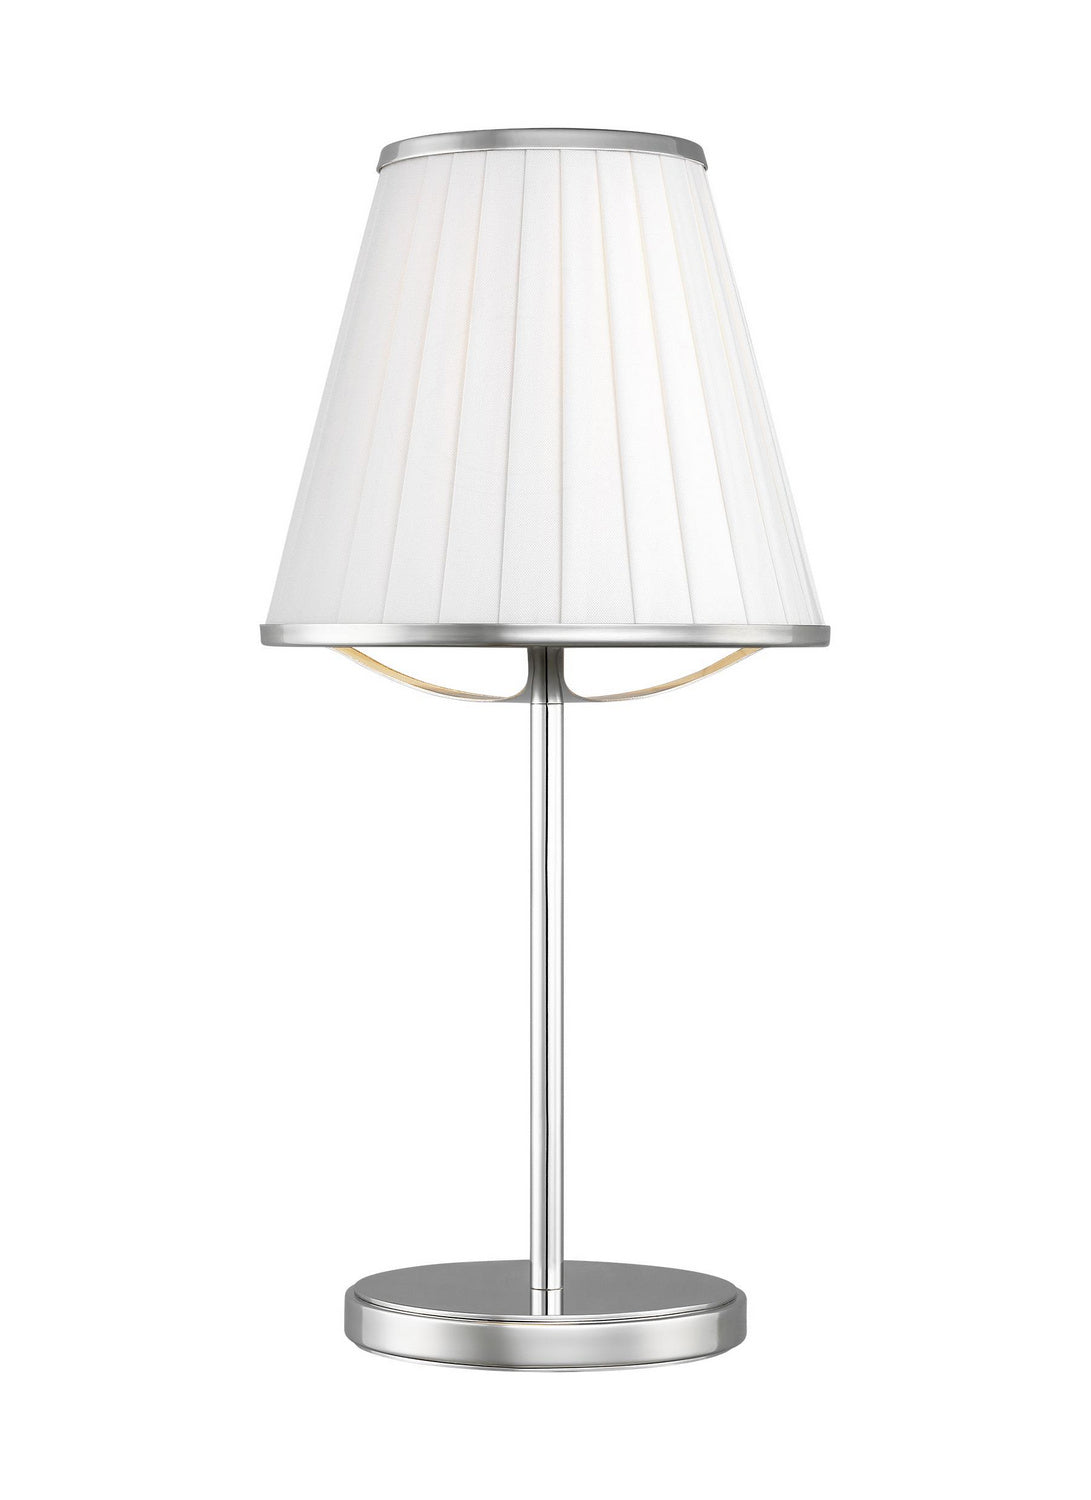 Load image into Gallery viewer, Visual Comfort Studio - LT1131PN1 - One Light Table Lamp - Esther - Polished Nickel
